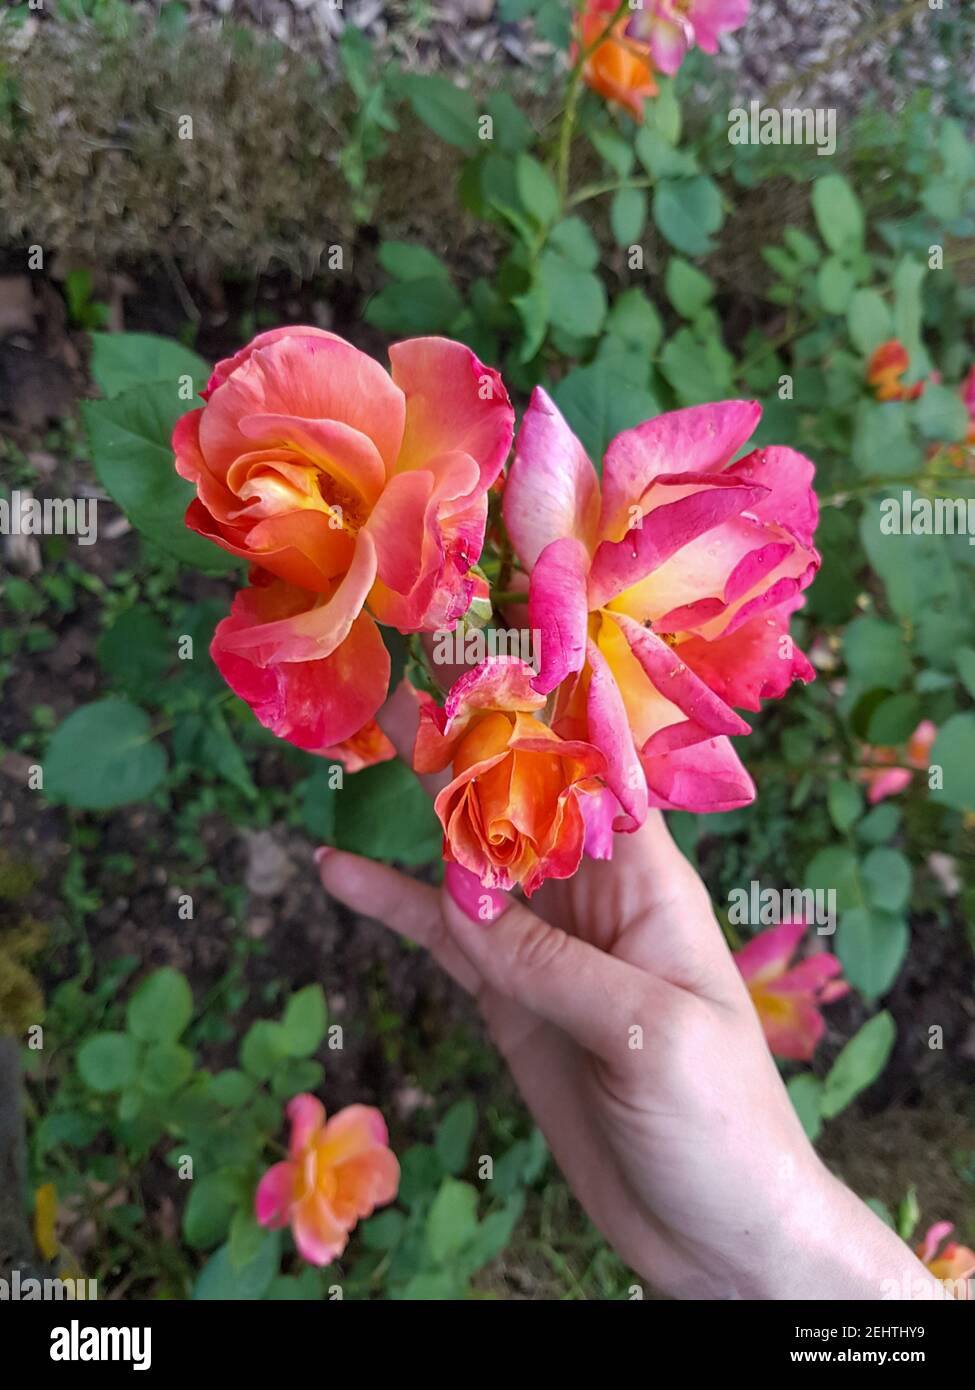 A hand holding a flower High photo Stock Photo